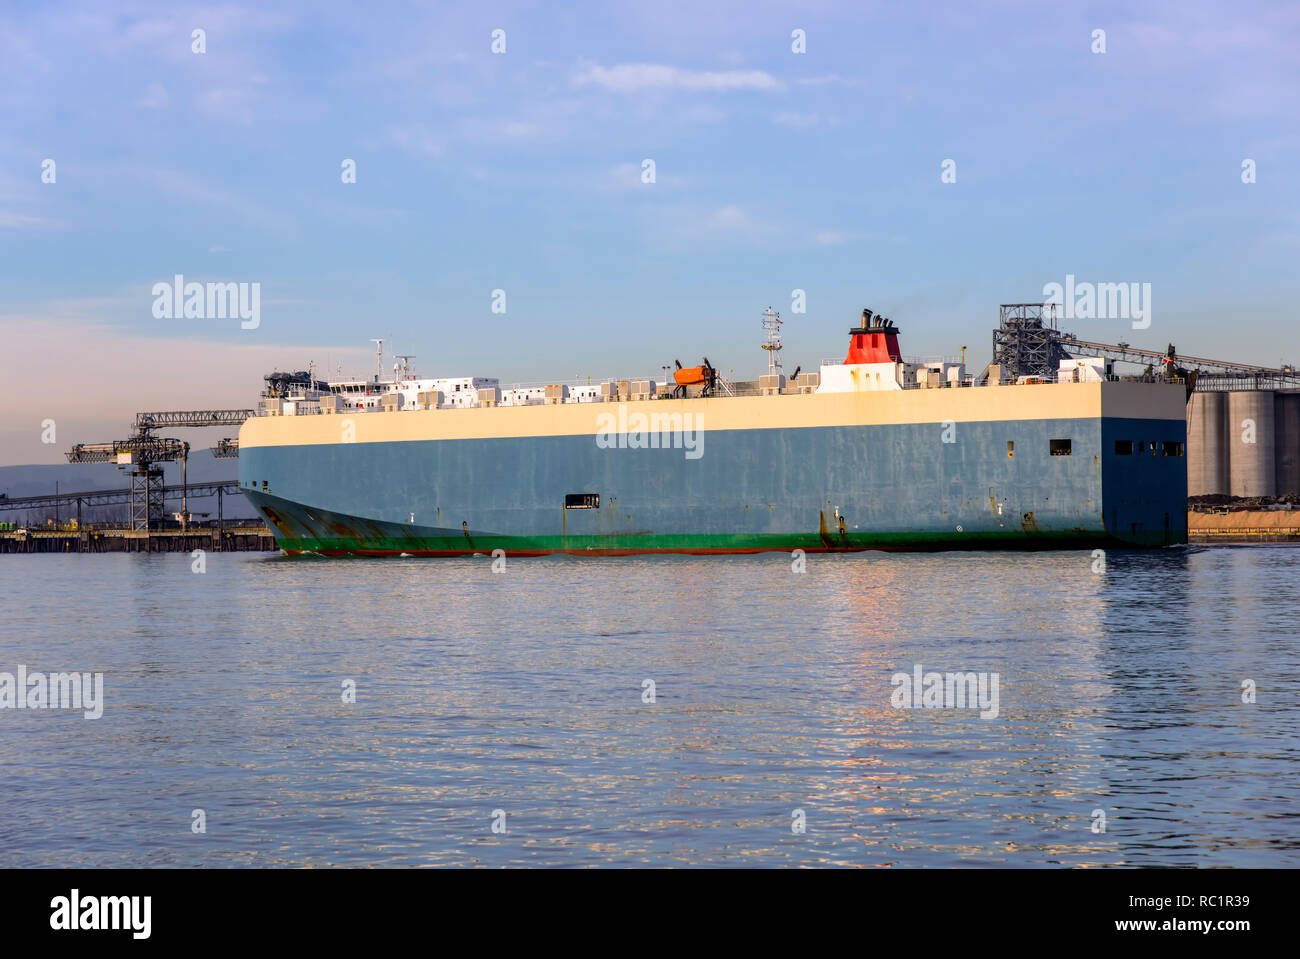 Large cargo tanker crusing back to the Pacific ocean Oregon. Stock Photo